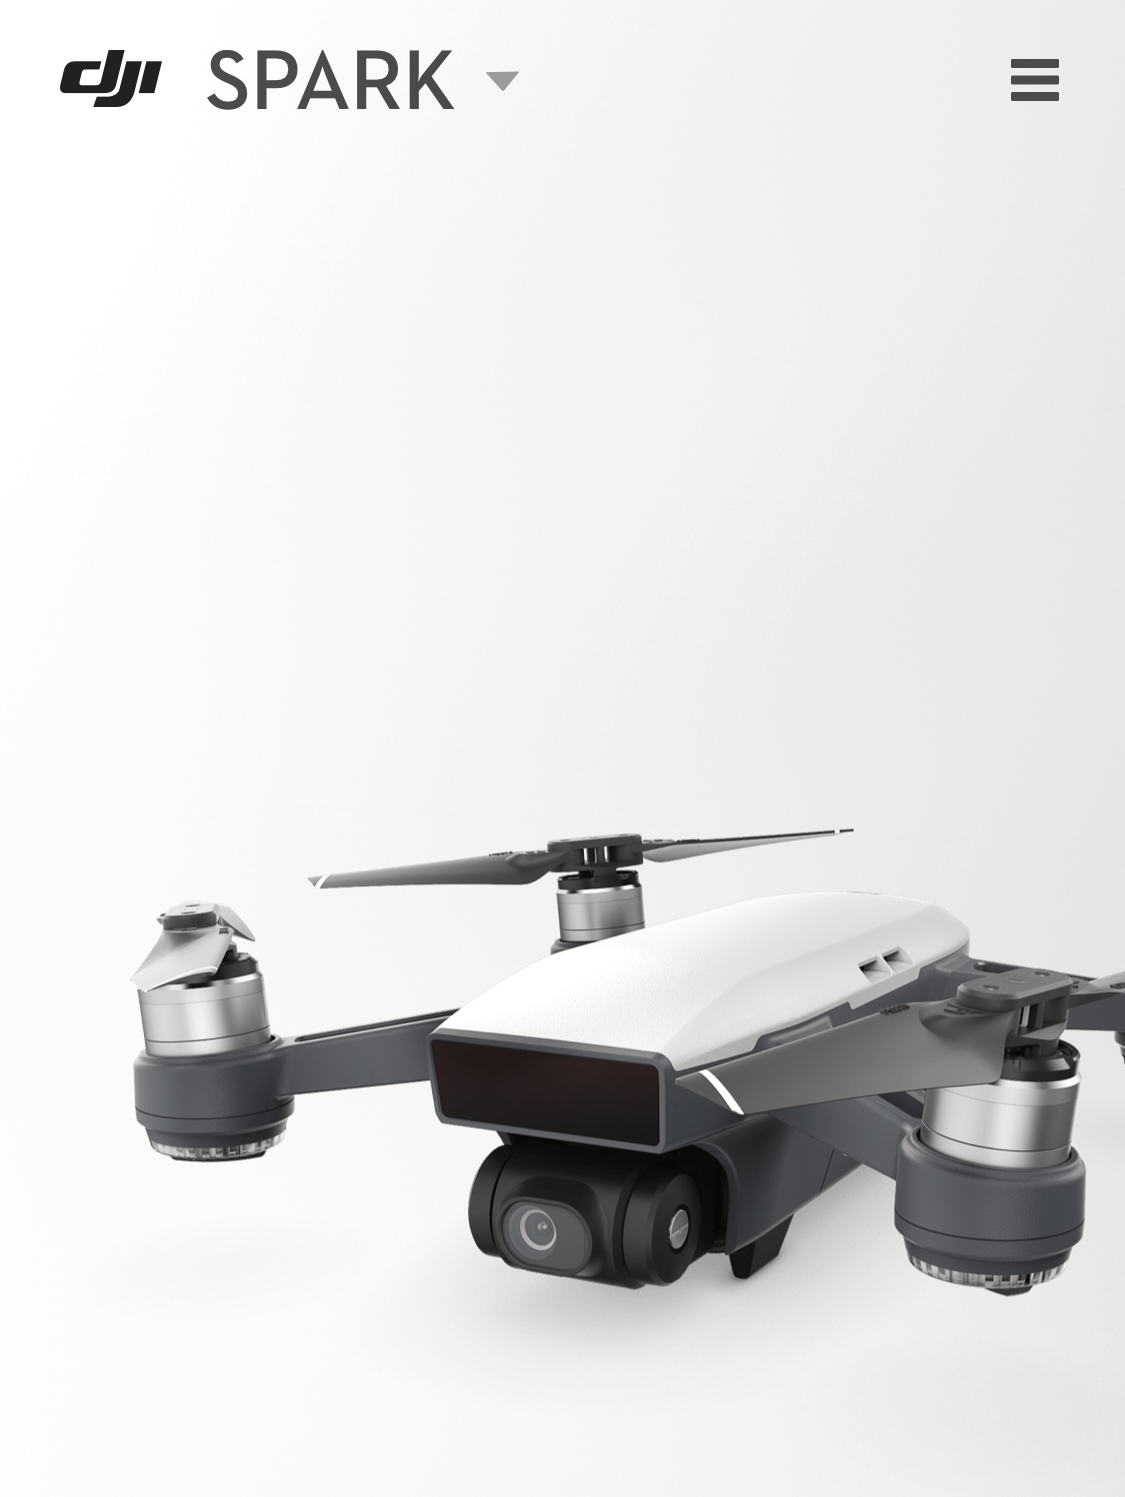 Image of DJI SPARK Drone, Lost Dog